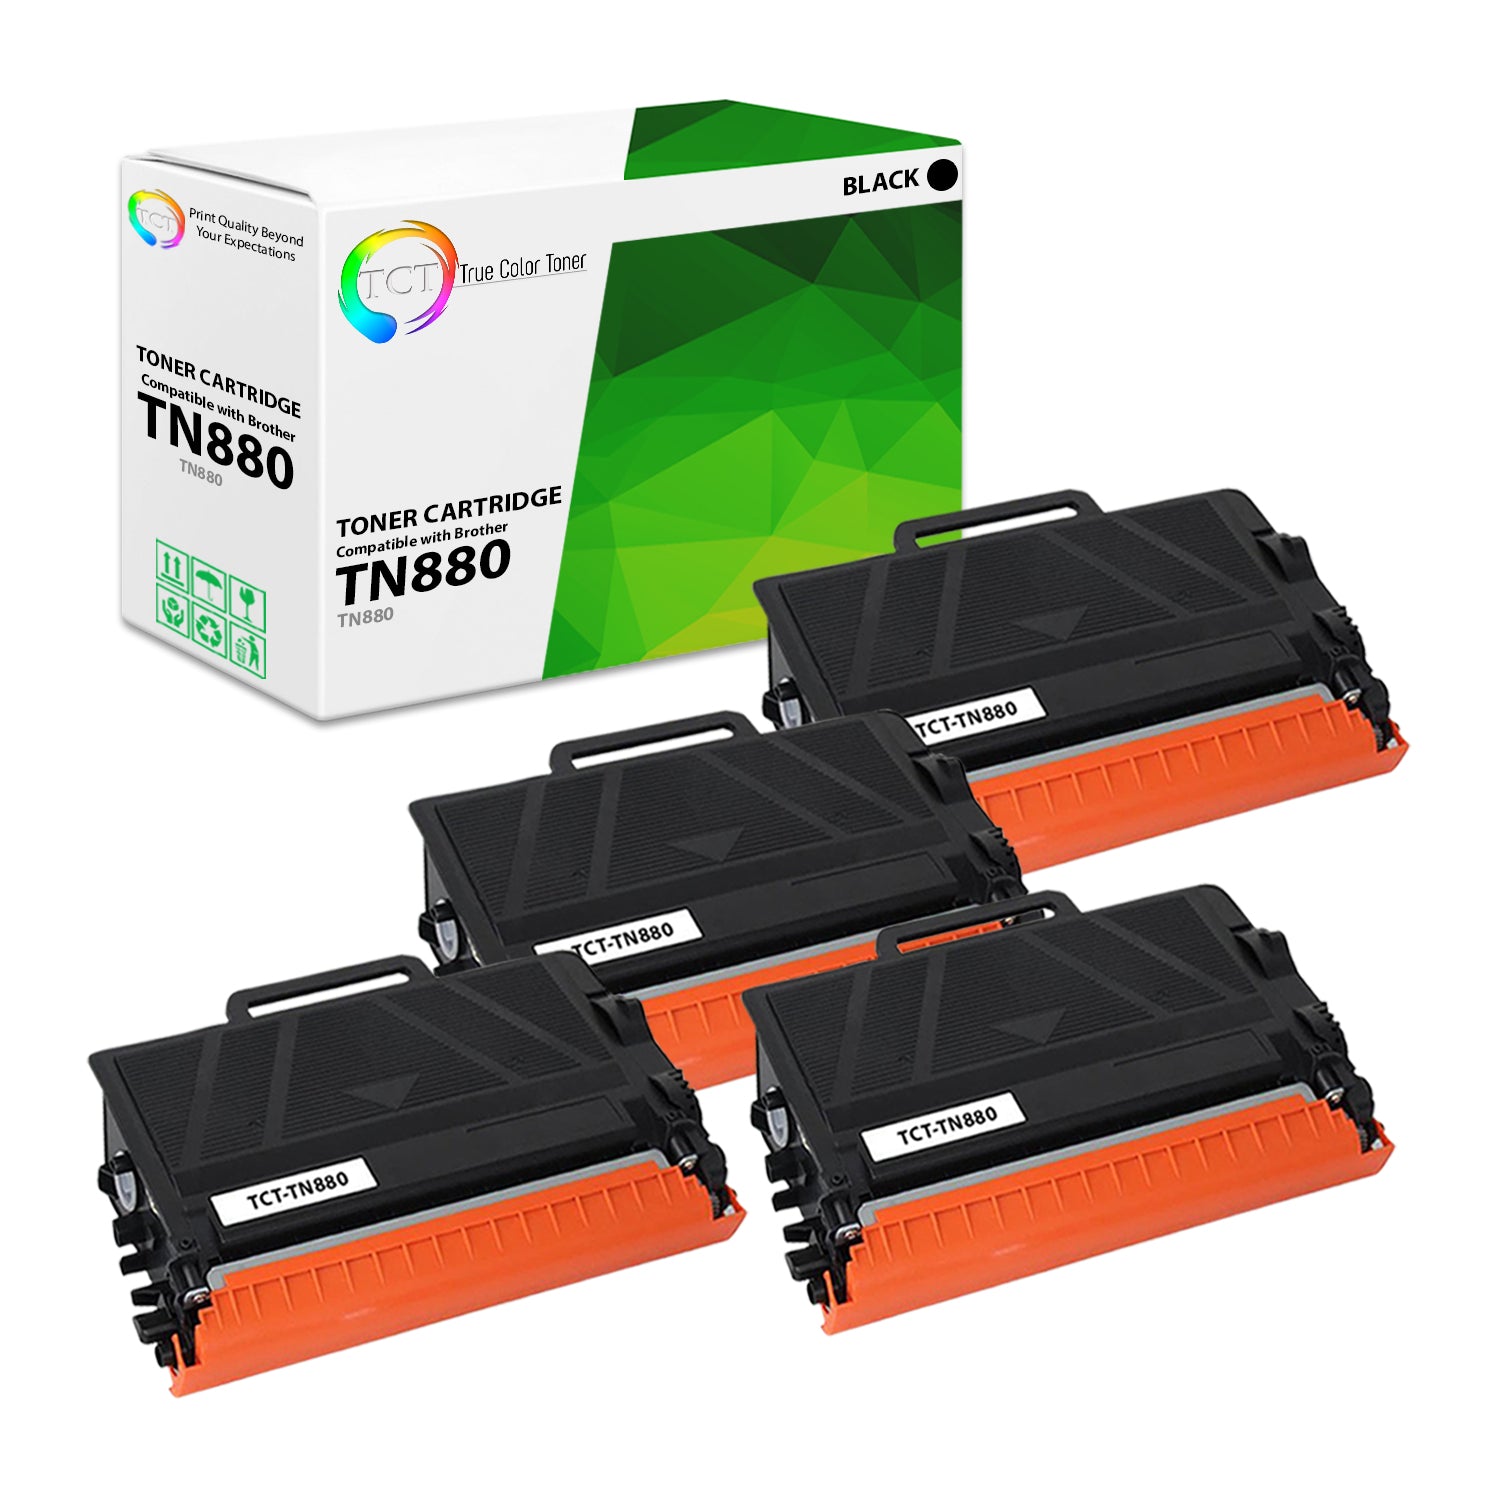 TCT Compatible Super HY Toner Cartridge Replacement for the Brother TN880 Series - 4 Pack Black